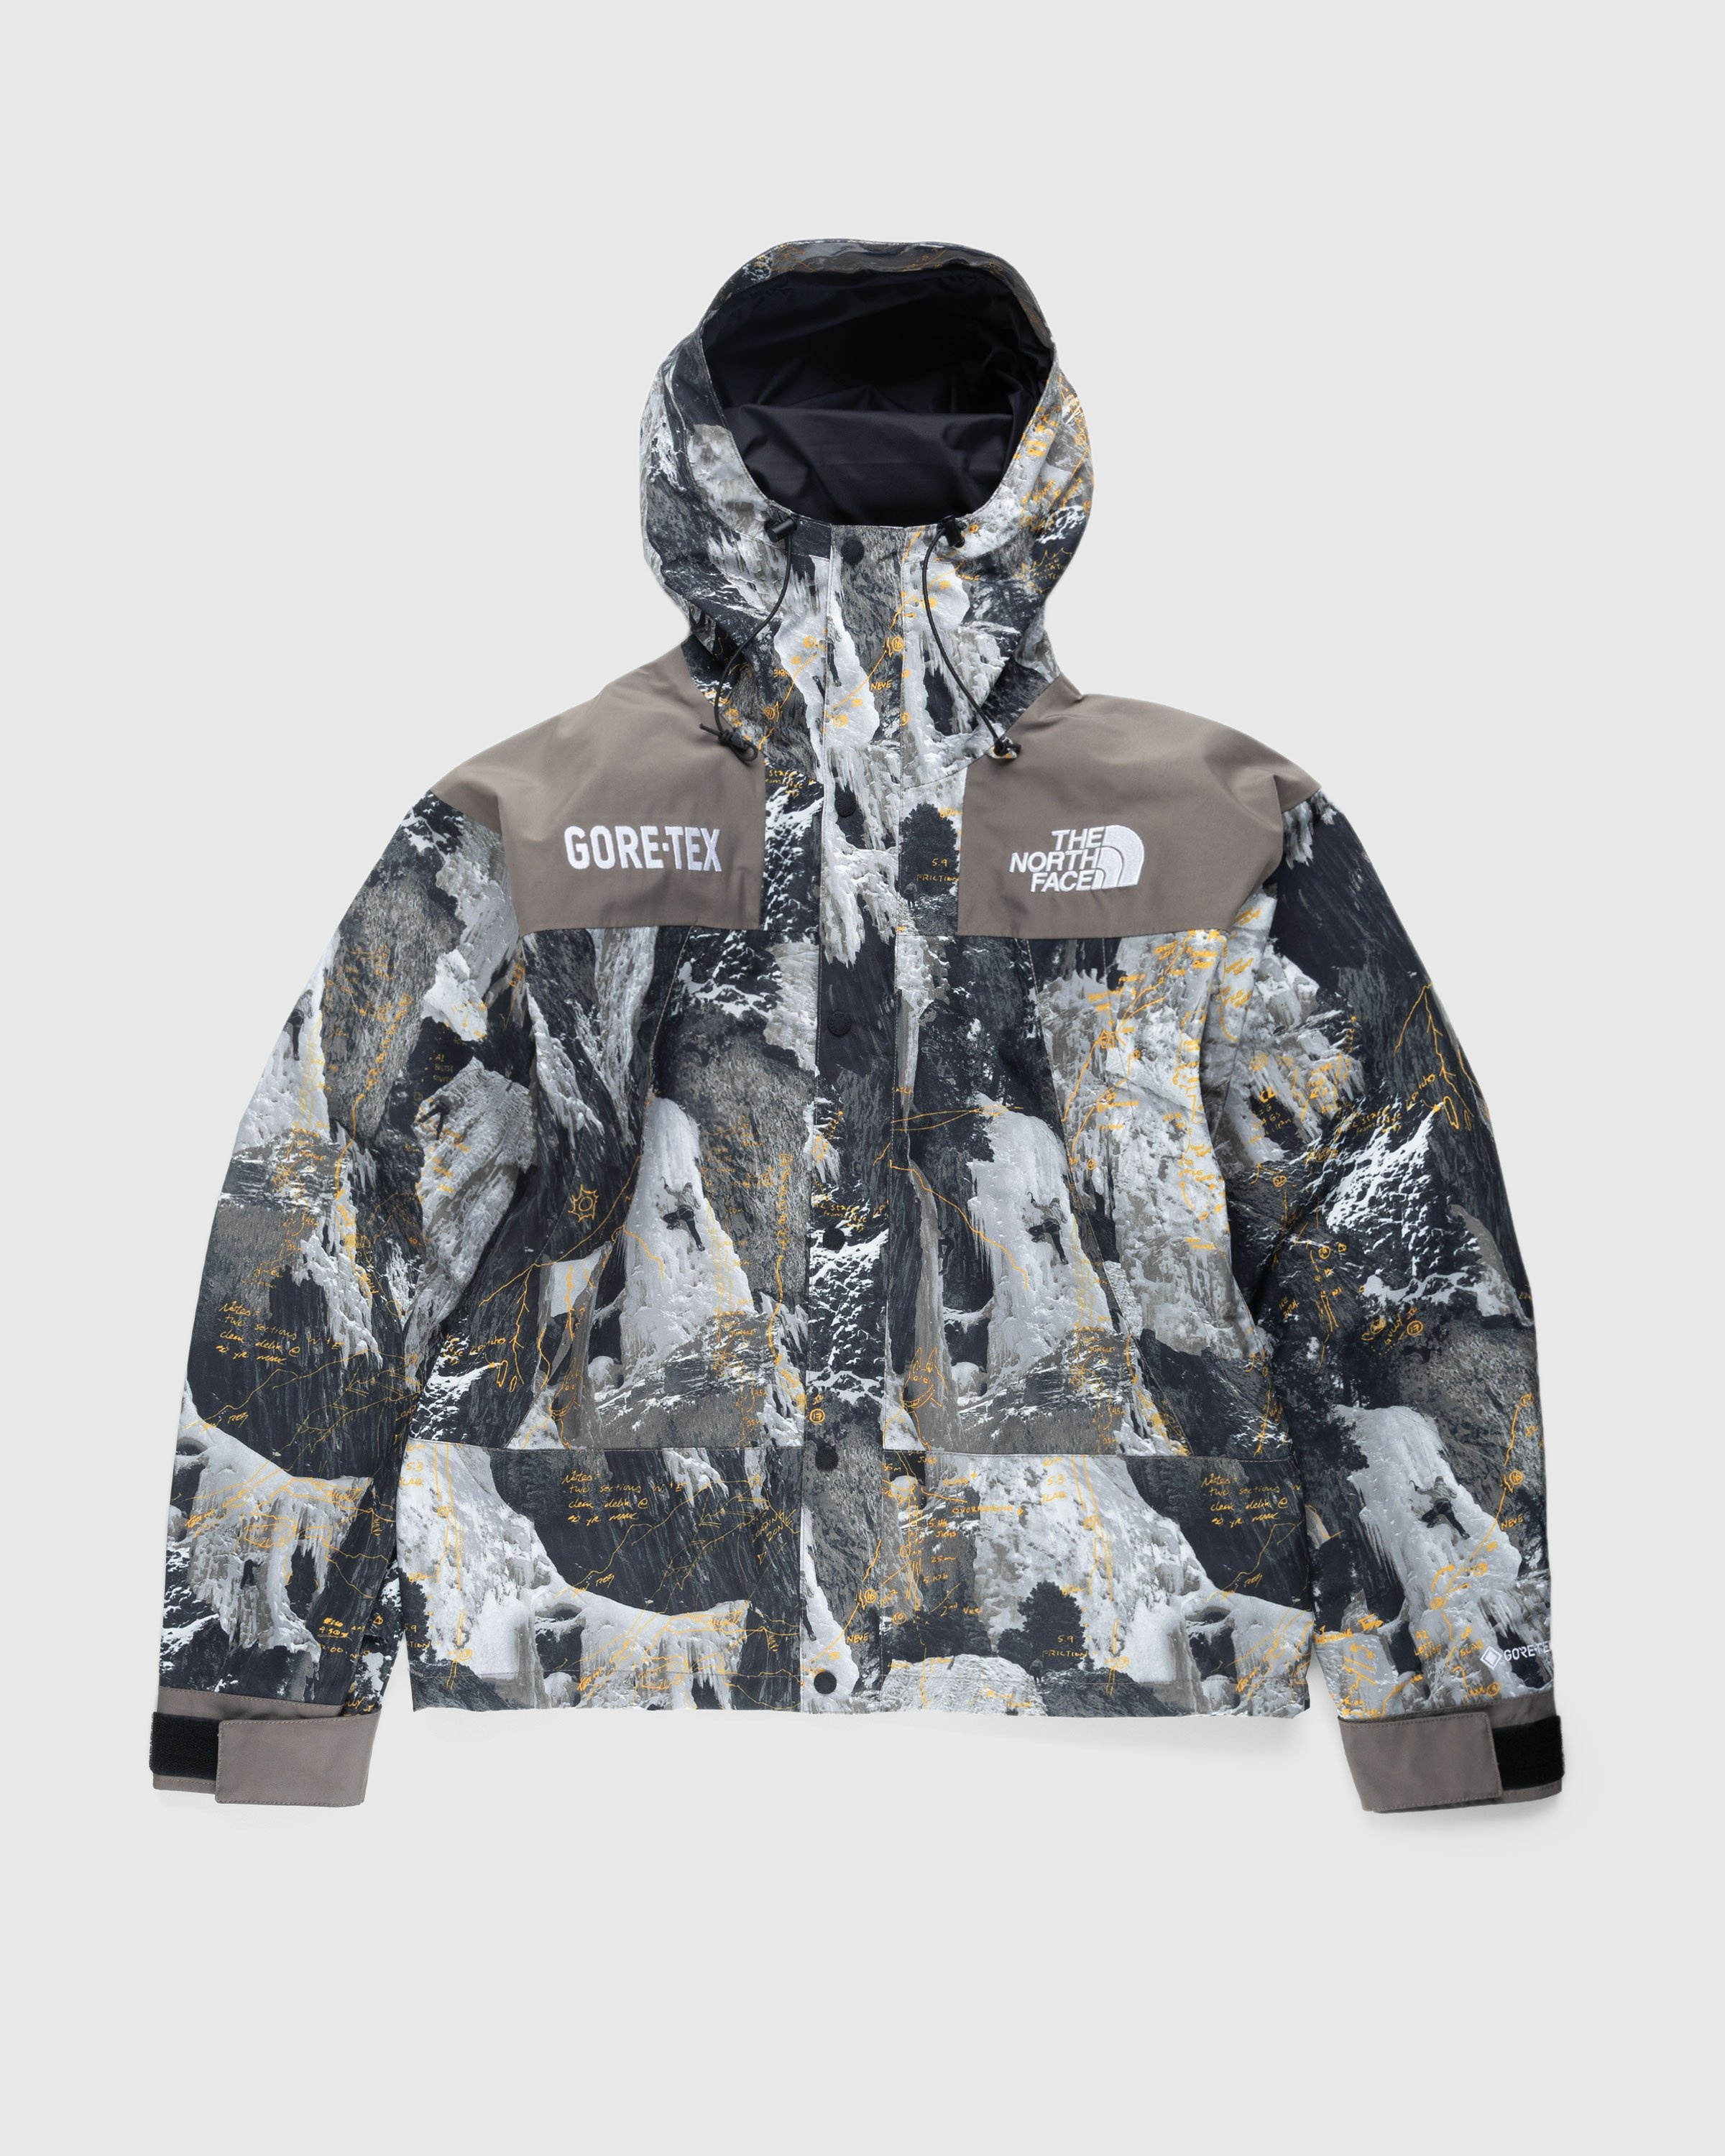 The North Face – GORE-TEX Mountain Jacket Falcon Brown Conrads Notes Print - Outerwear - Multi - Image 1